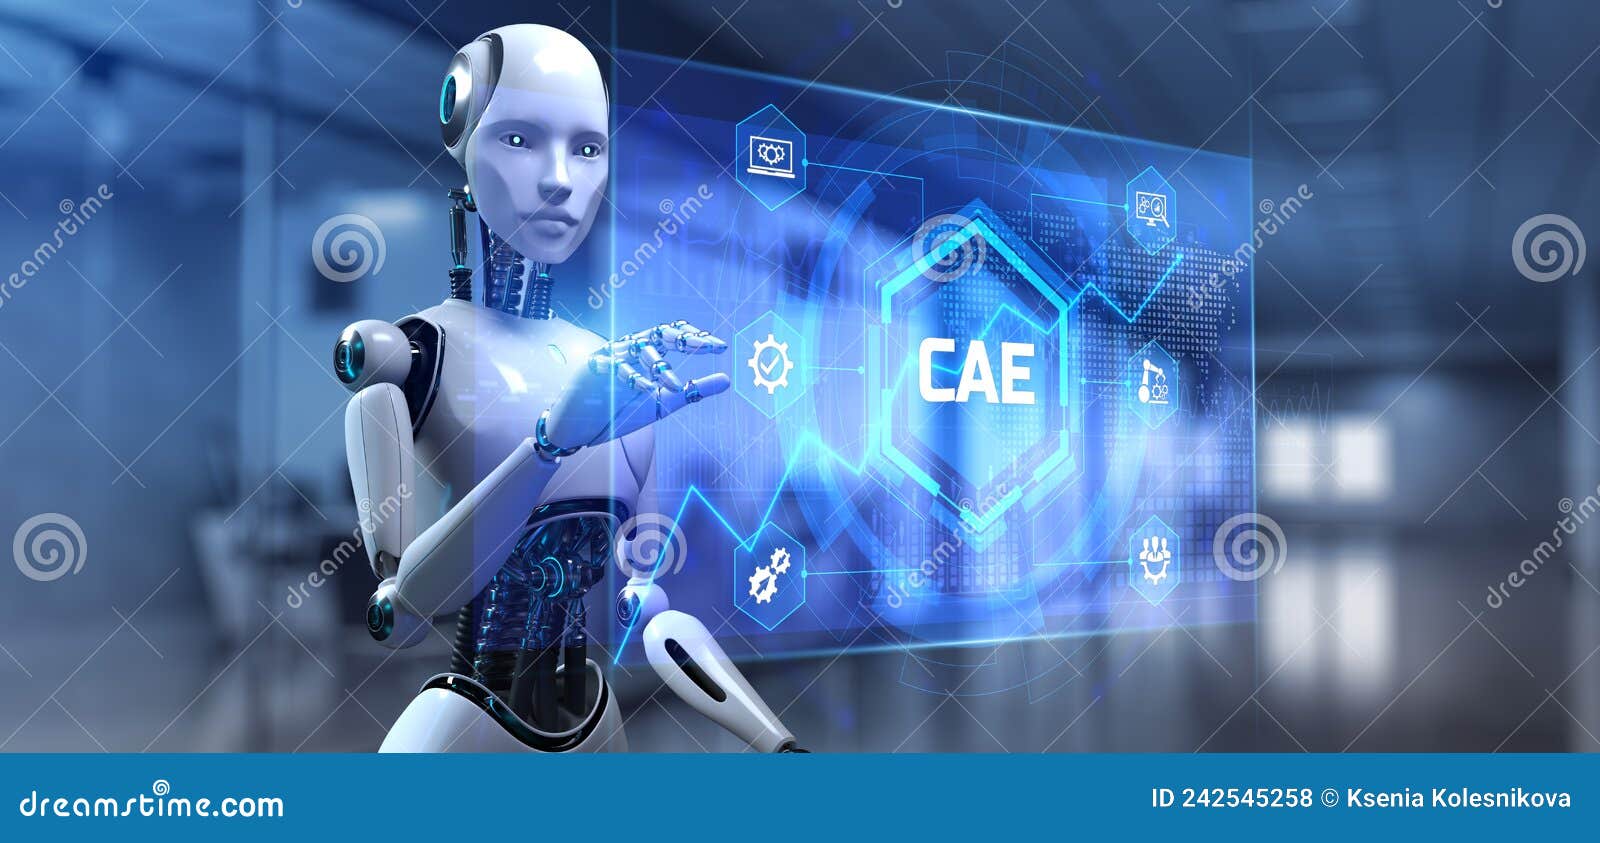 cae computer-aided engineering software system. technology concept. robot pressing button on screen 3d render